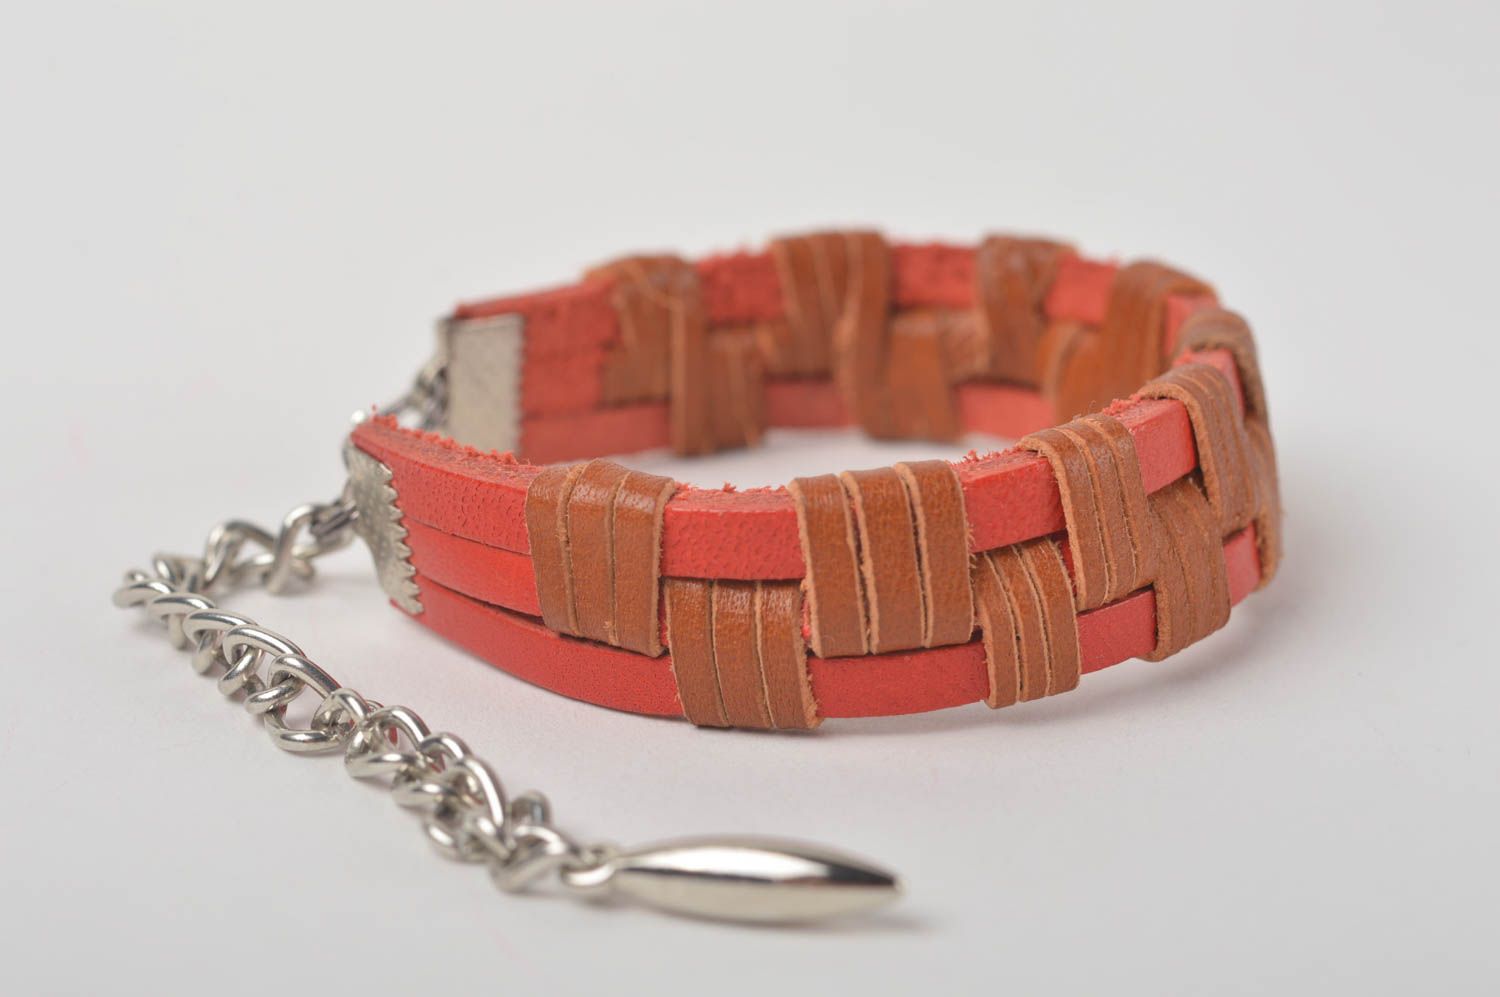 Handmade leather bracelet designs cool jewelry leather goods gift ideas photo 4